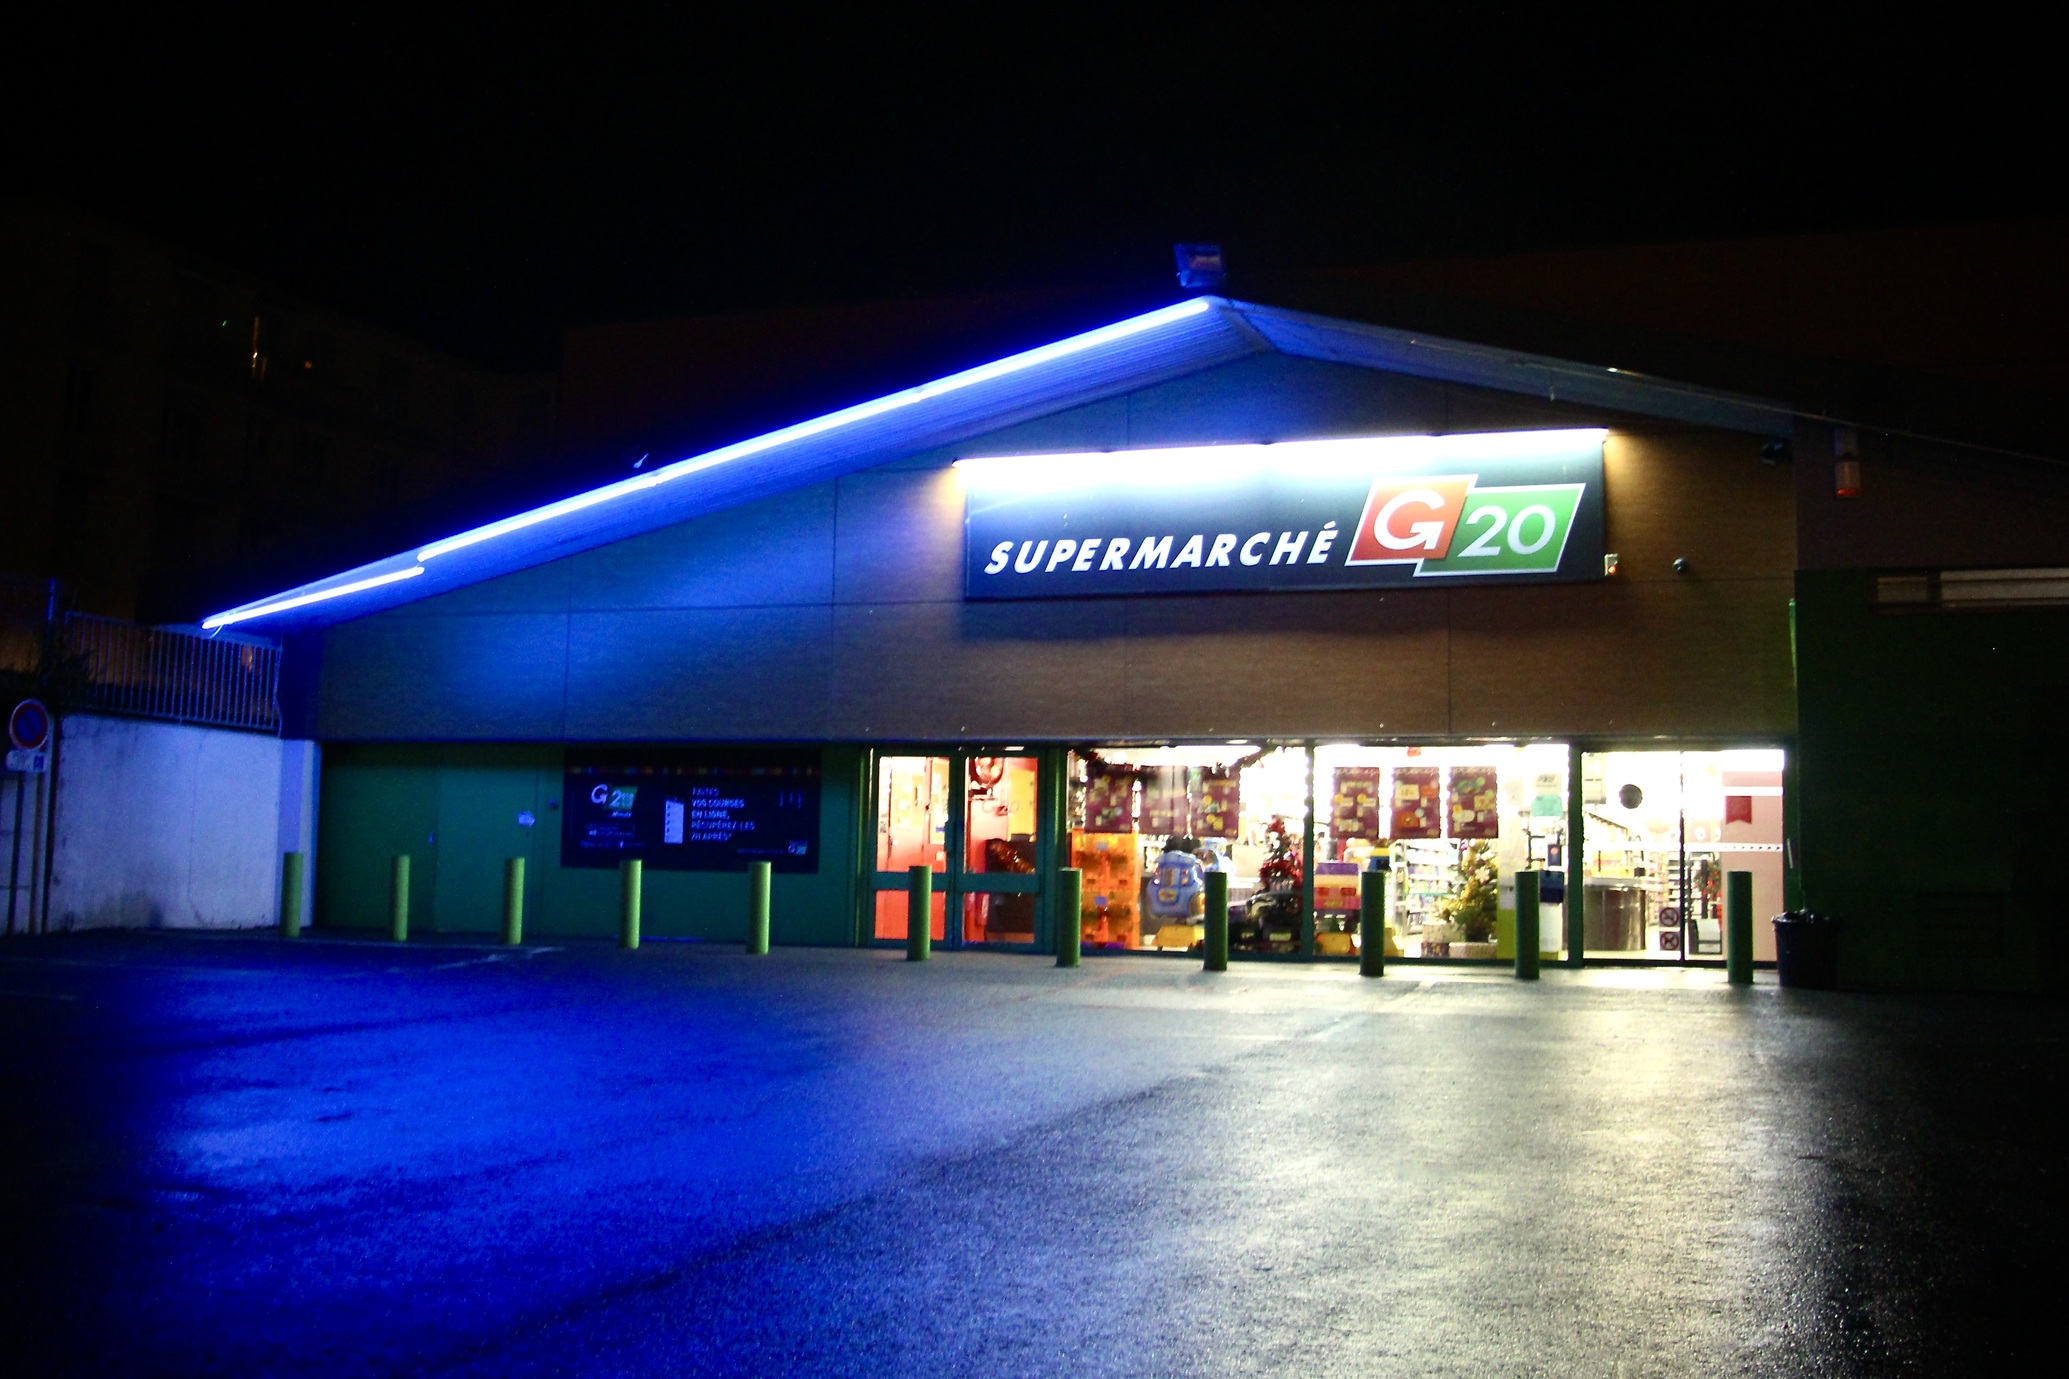 A nighttime view of a G20 grocery store in Reims, France.